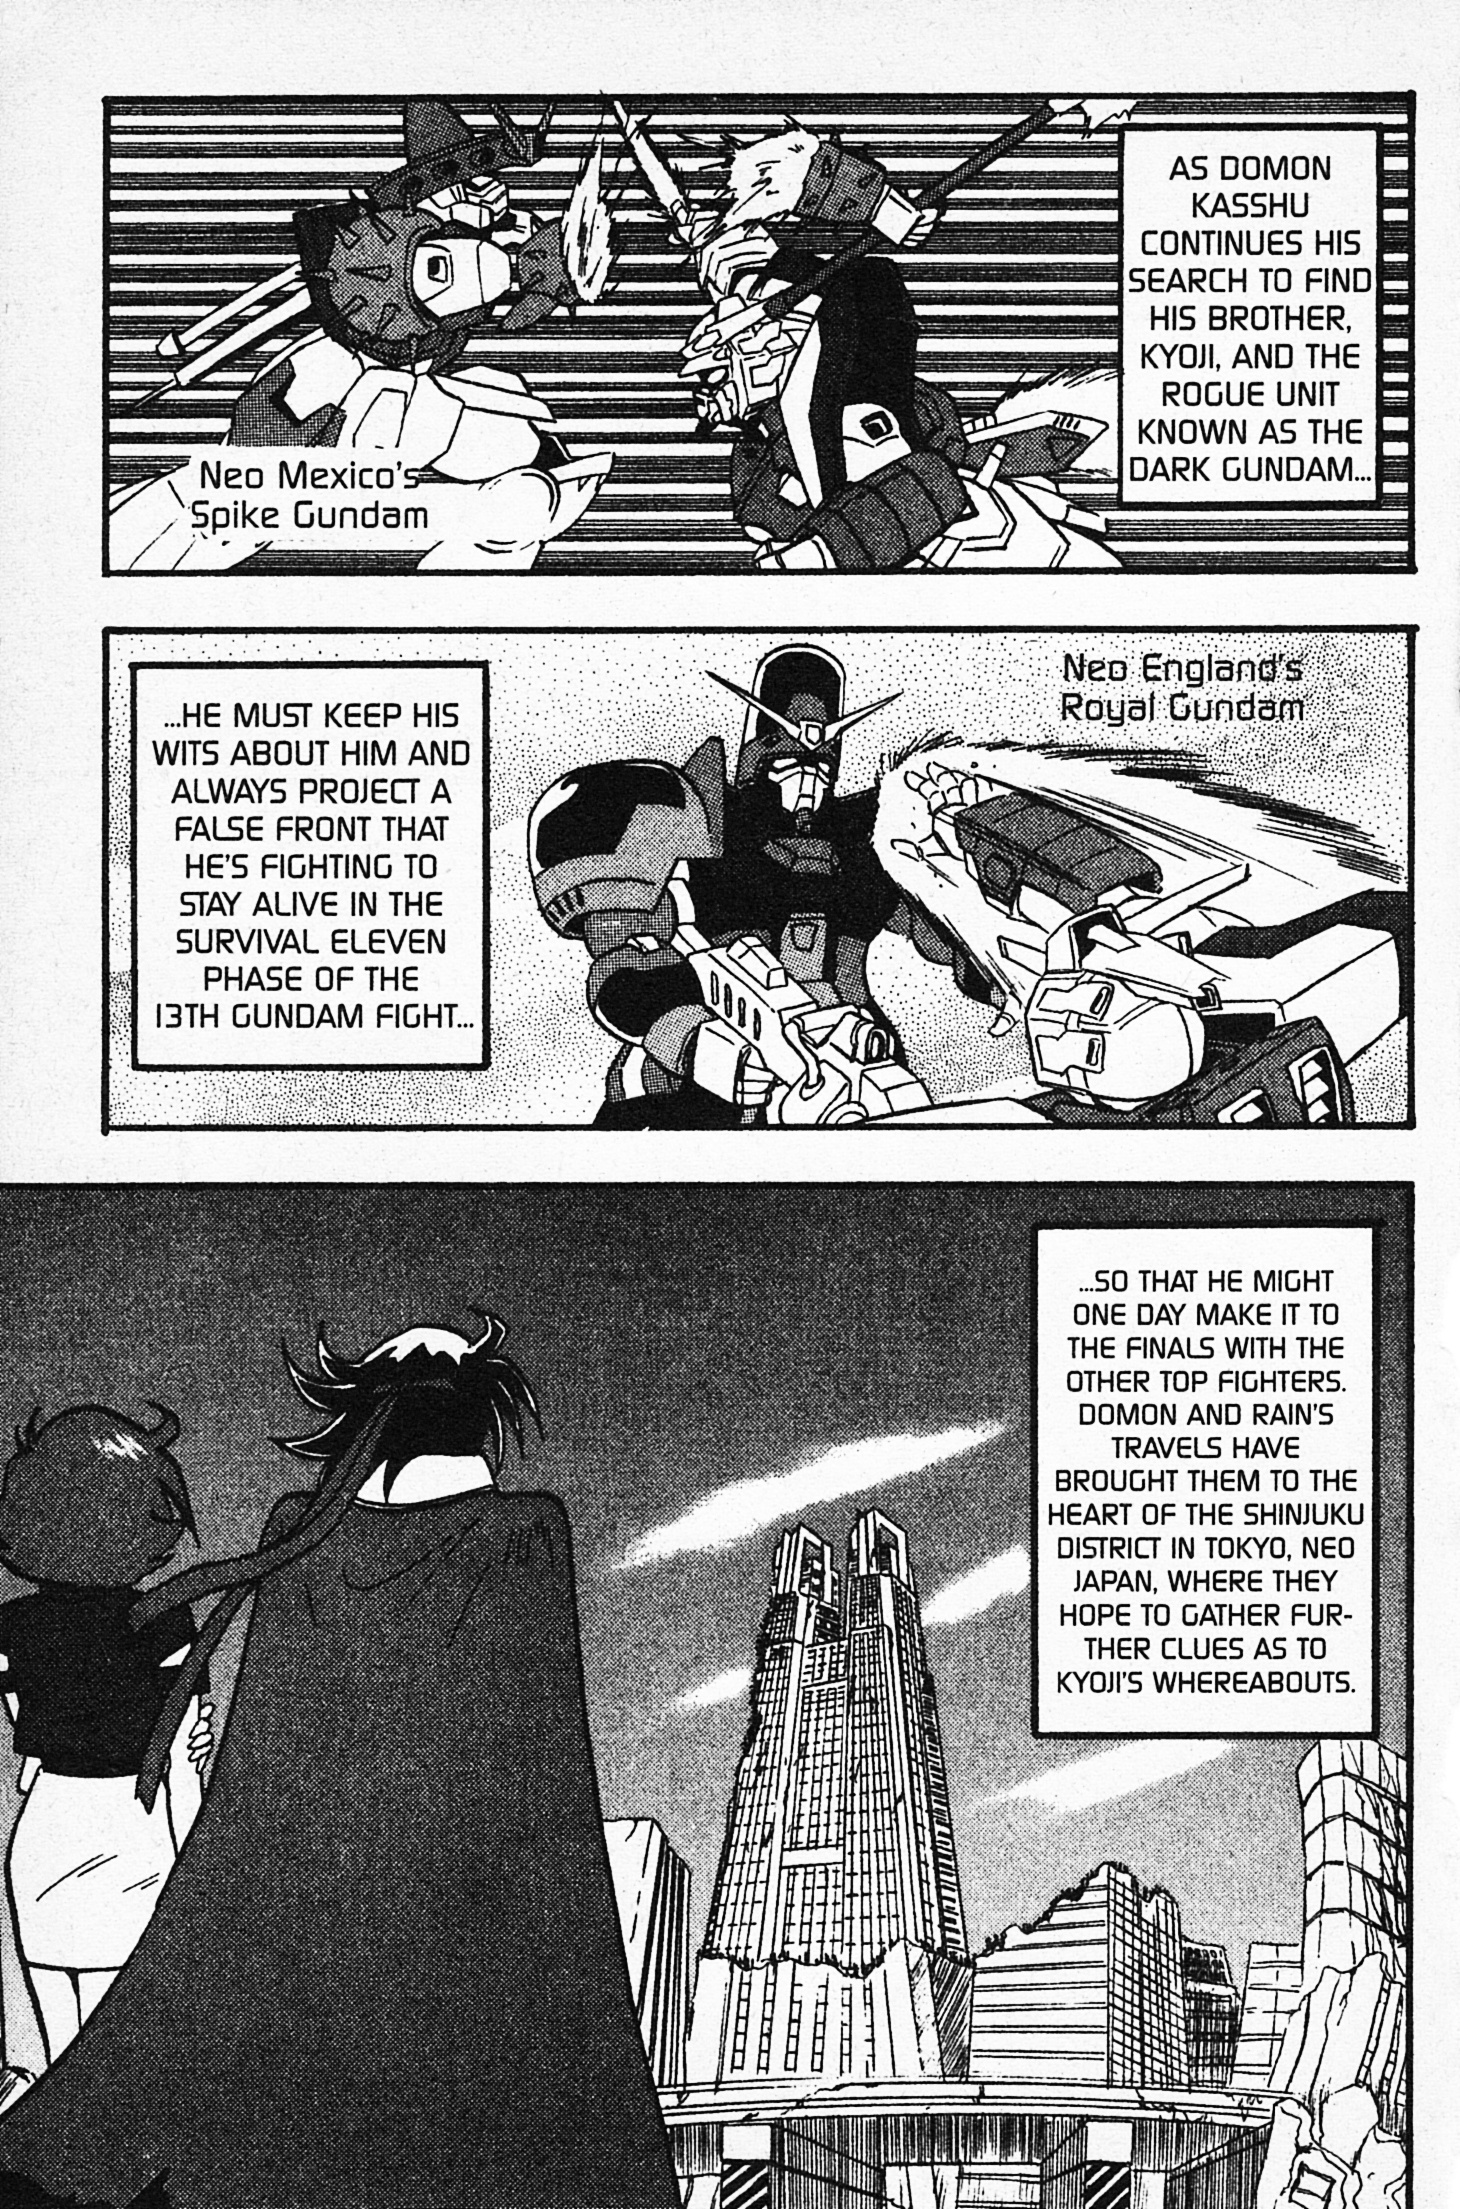 Mobile Fighter G Gundam Vol.1 Chapter 5: The Shuffle Alliance Vs. Master Gundam And The Big Four - Picture 1